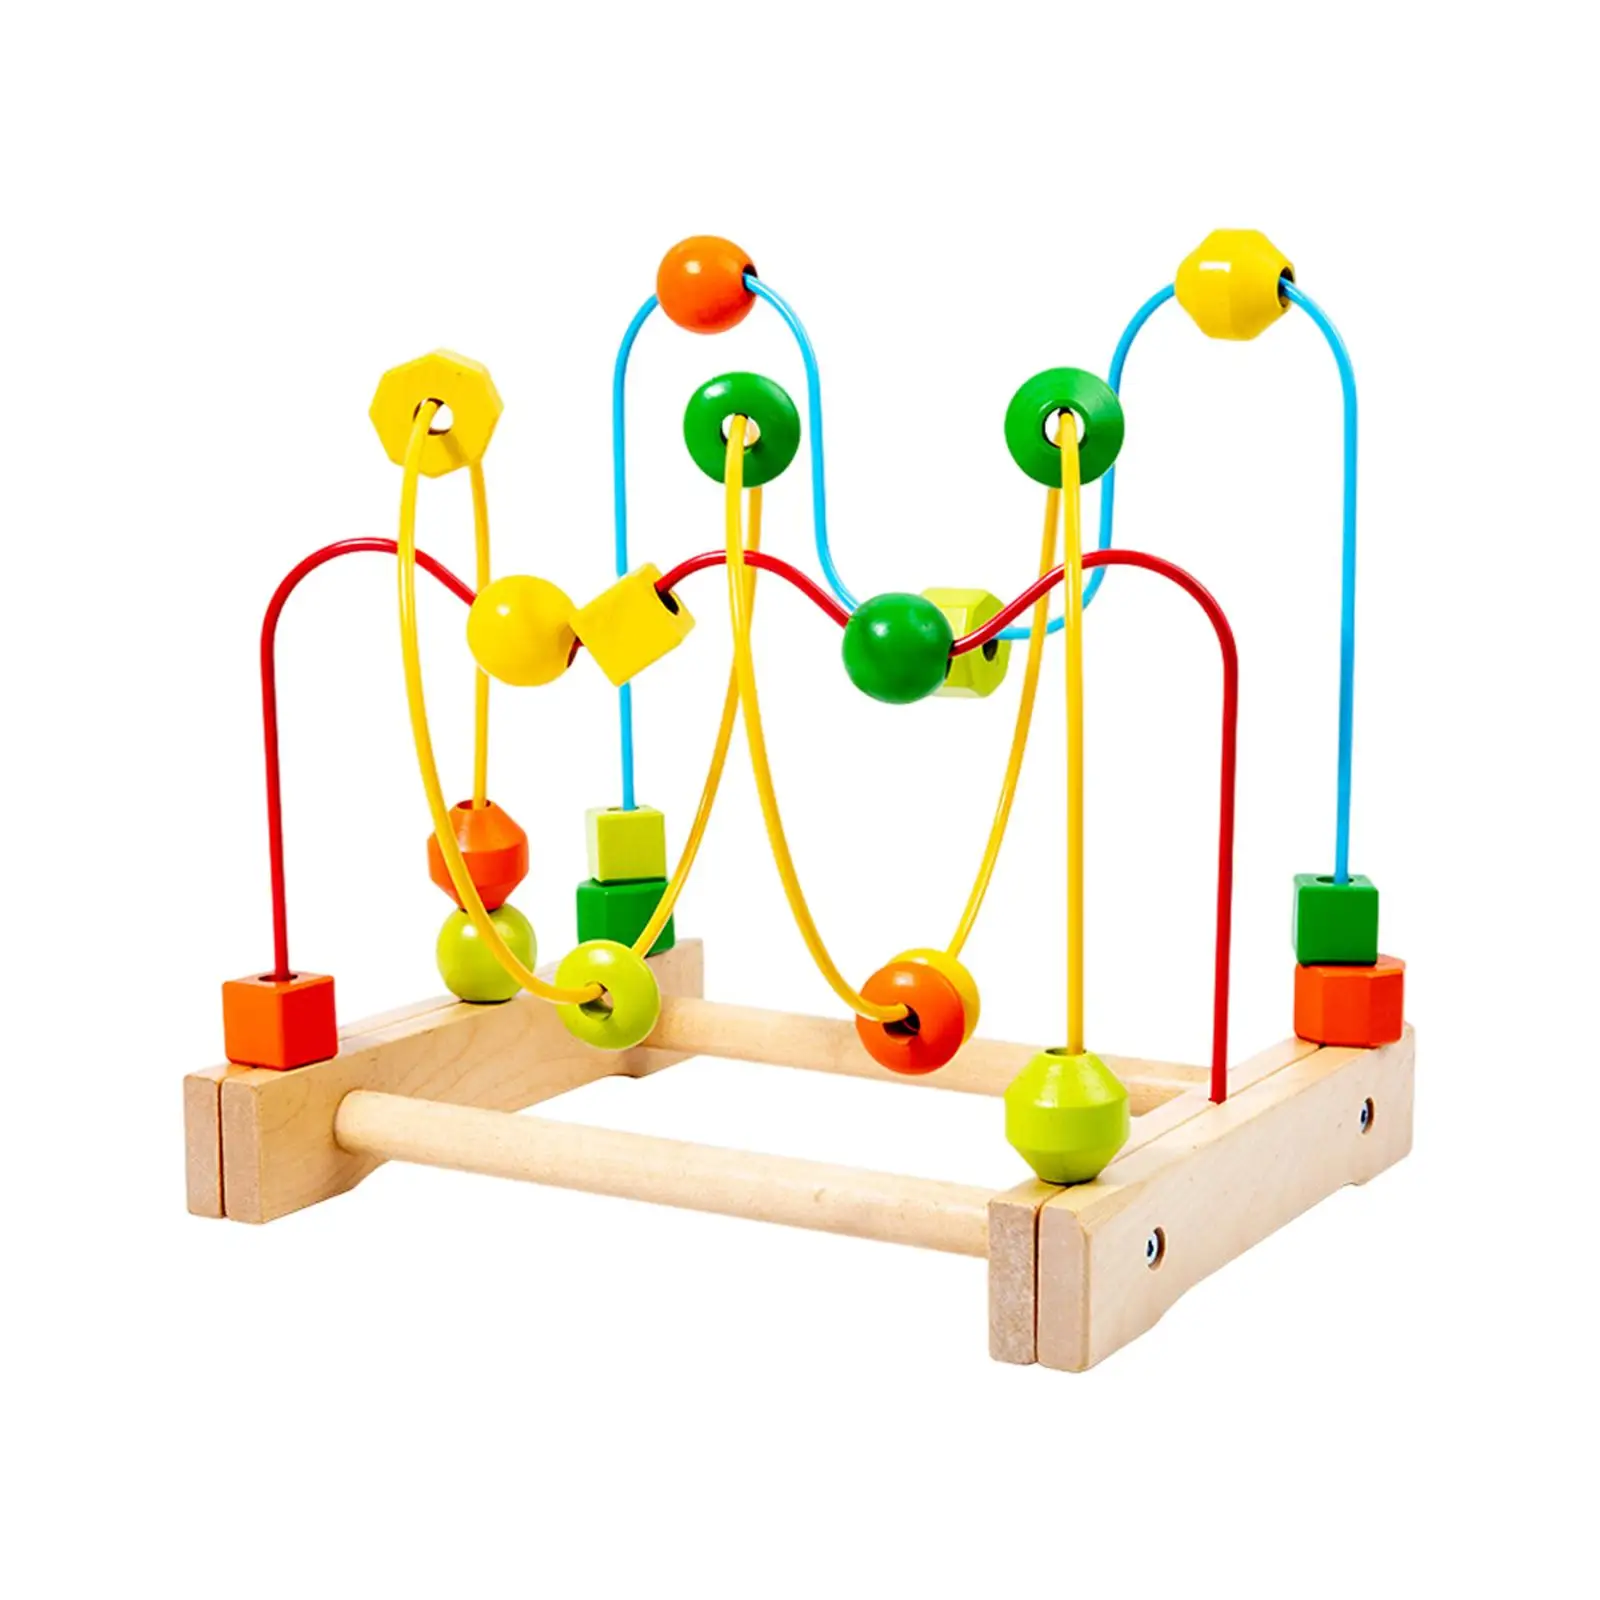 Bead Toy, Preschool Educational Toy, Child Wooden Training Attention Ability